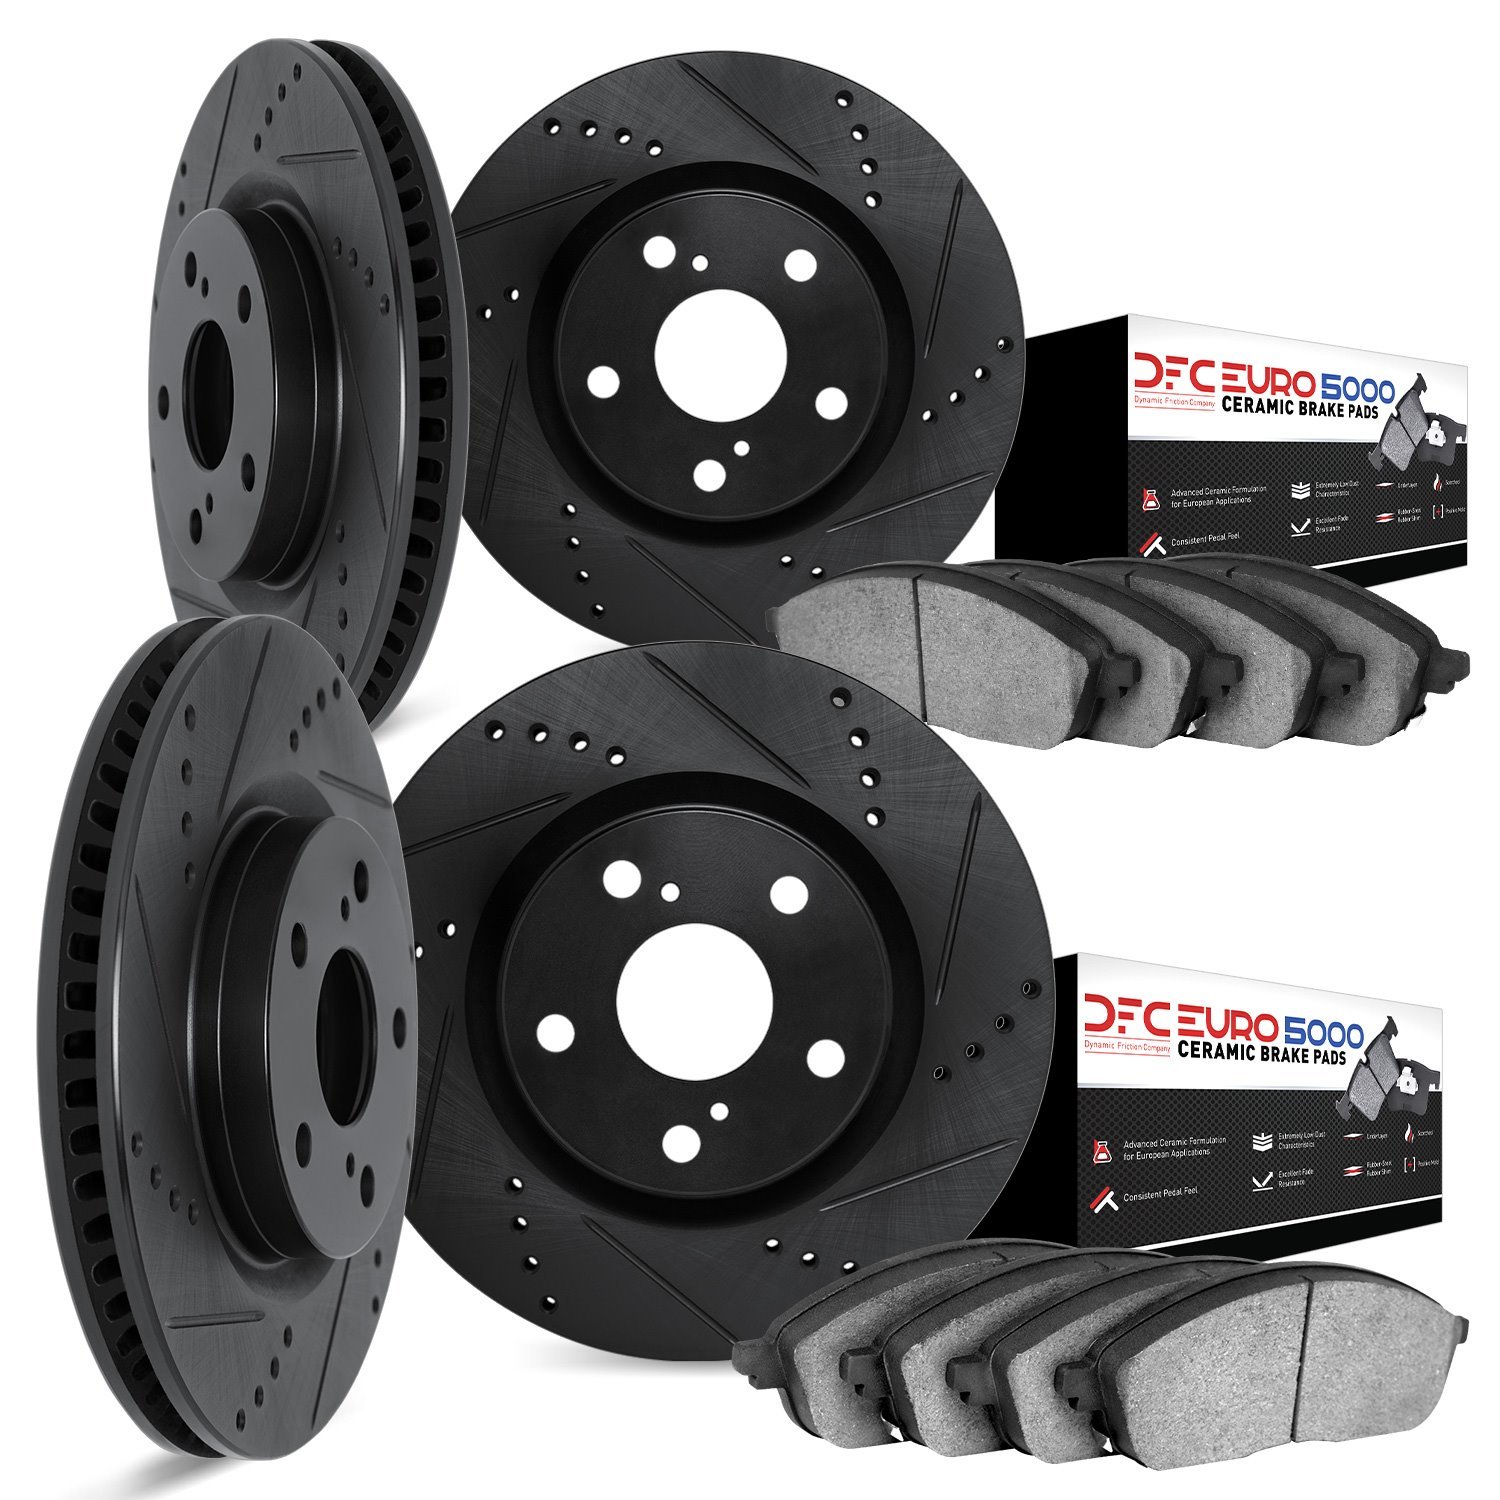 8604-31038 Drilled/Slotted Brake Rotors w/5000 Euro Ceramic Brake Pads Kit [Black], Fits Select BMW, Position: Front and Rear